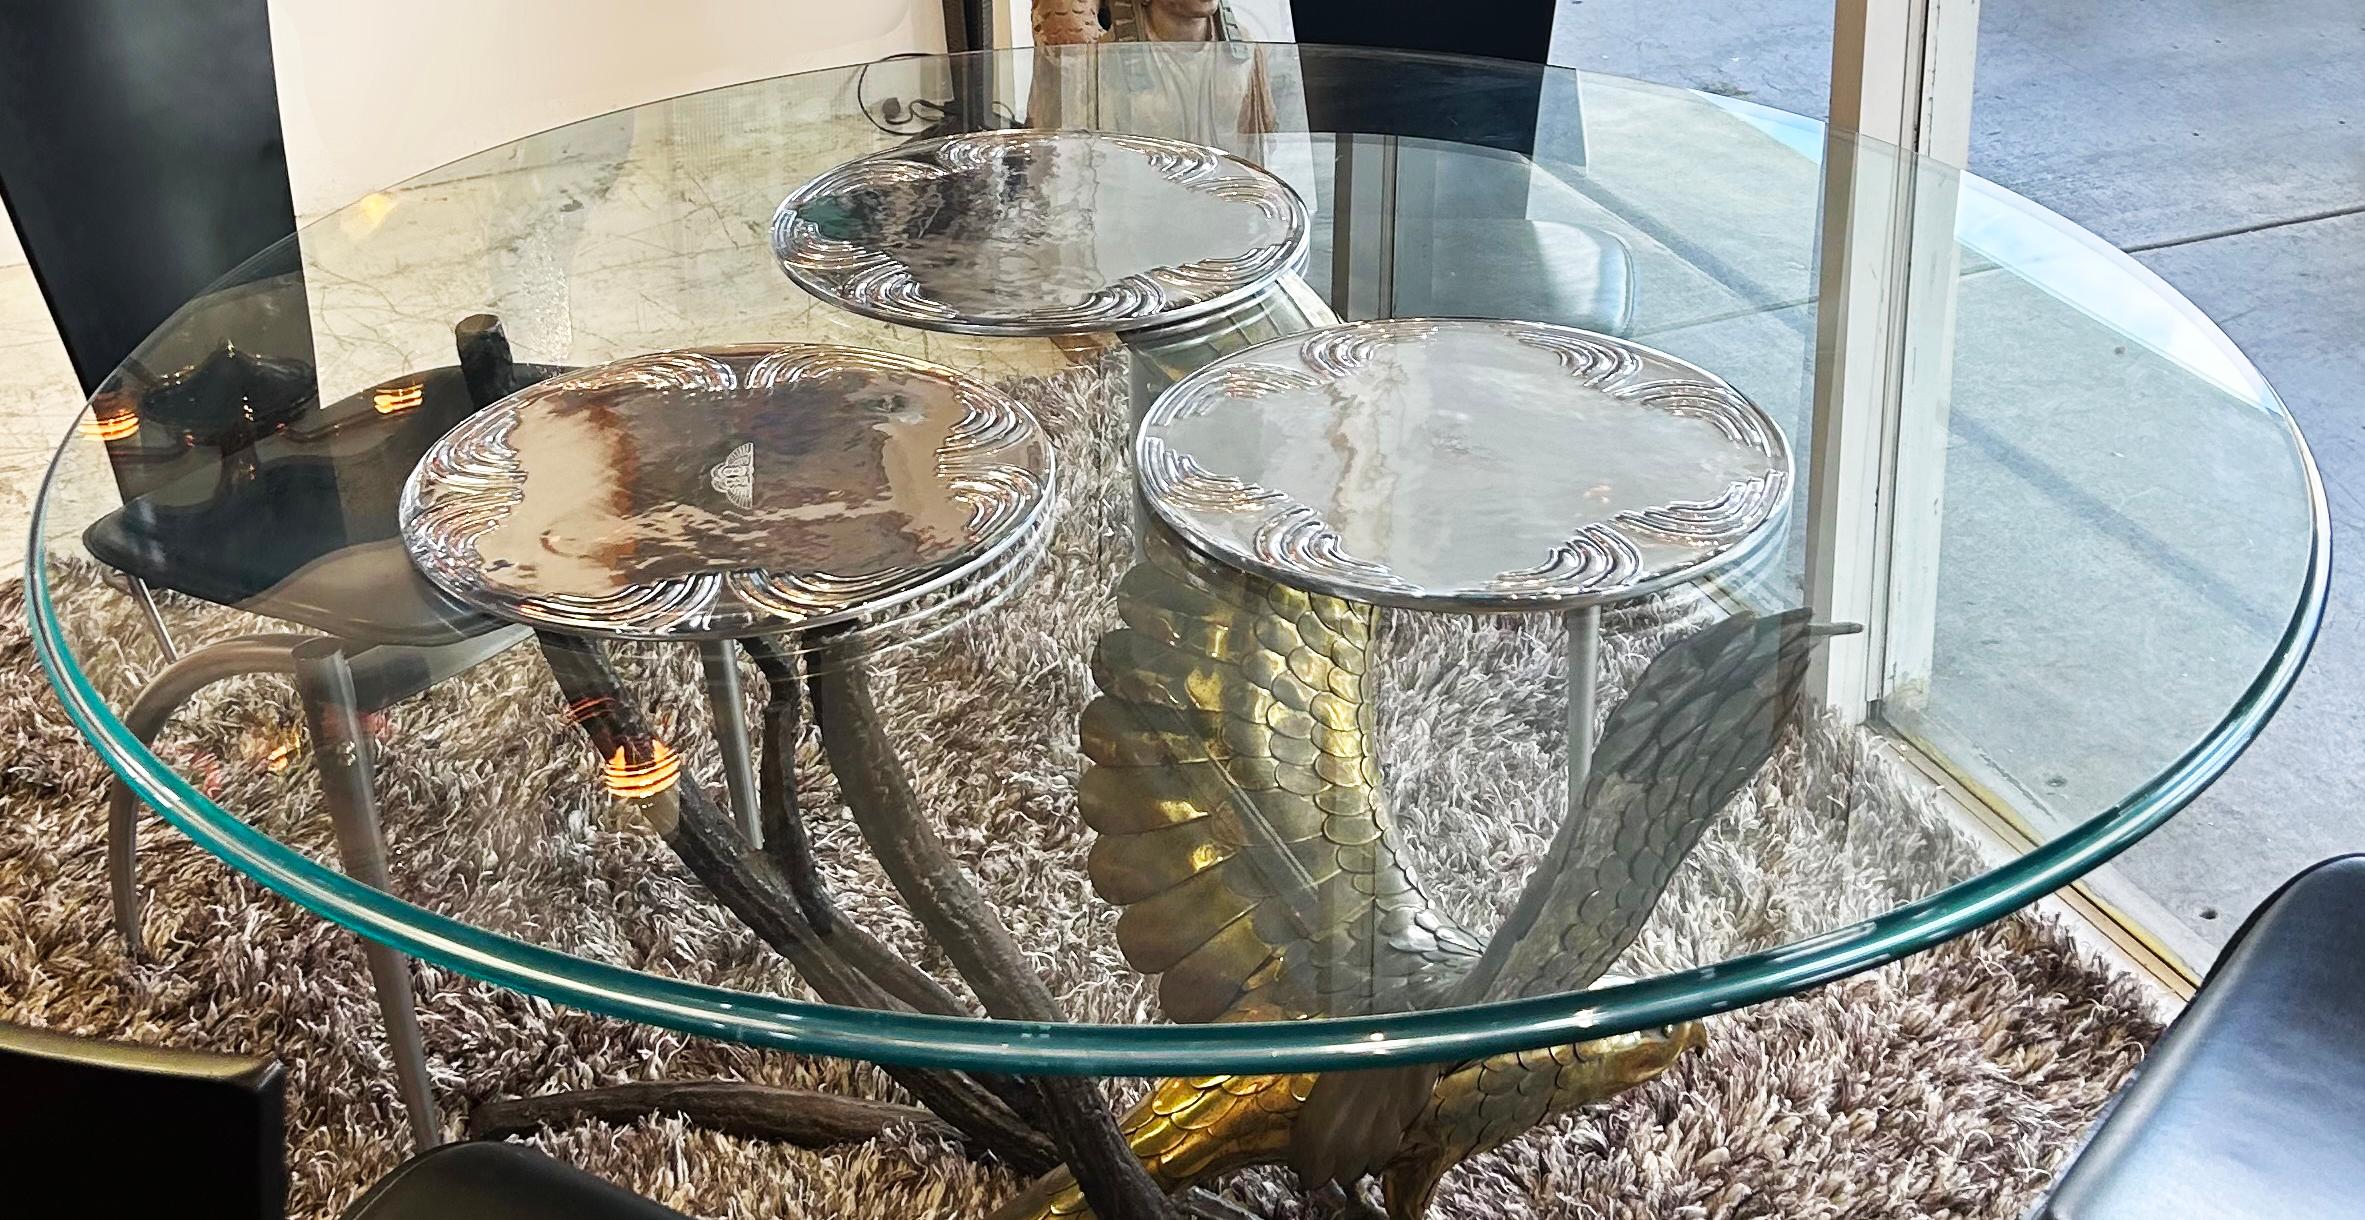 Bentley Home Glass Coated Sterling Silver Chargers/Buffet Plate, Set of Six (6)

Offered for sale is a set of six (6) substantial sterling silver and glass-coated chargers/buffet plates by Bentley Home of England. Each is a beautiful charger for a